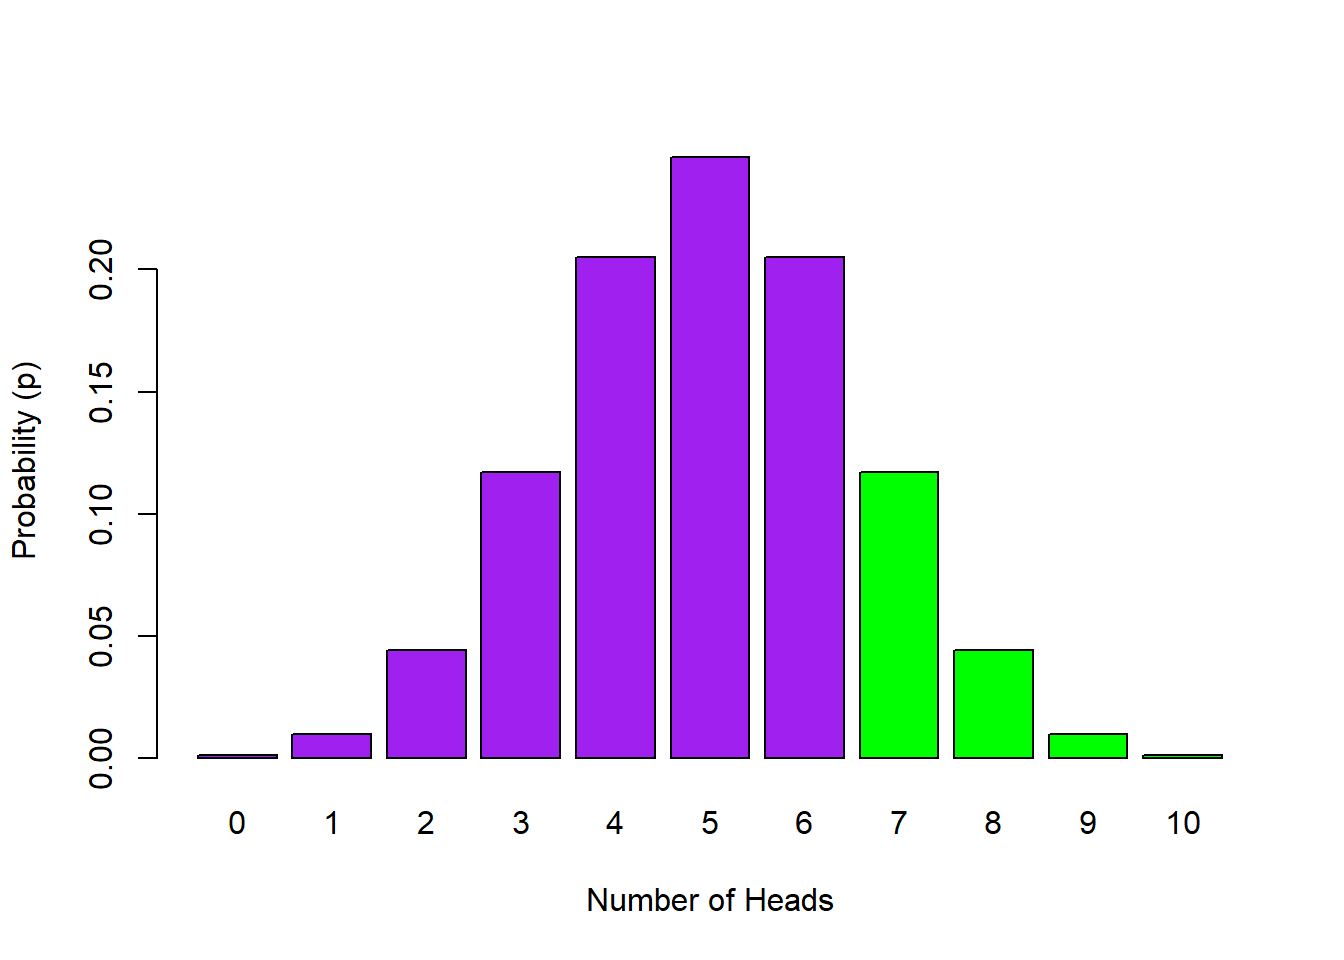 Probability Distribution of Number of Heads in 10 Flips with the probability of 7 or more Heads highlighted in green - `lower.tail = FALSE`